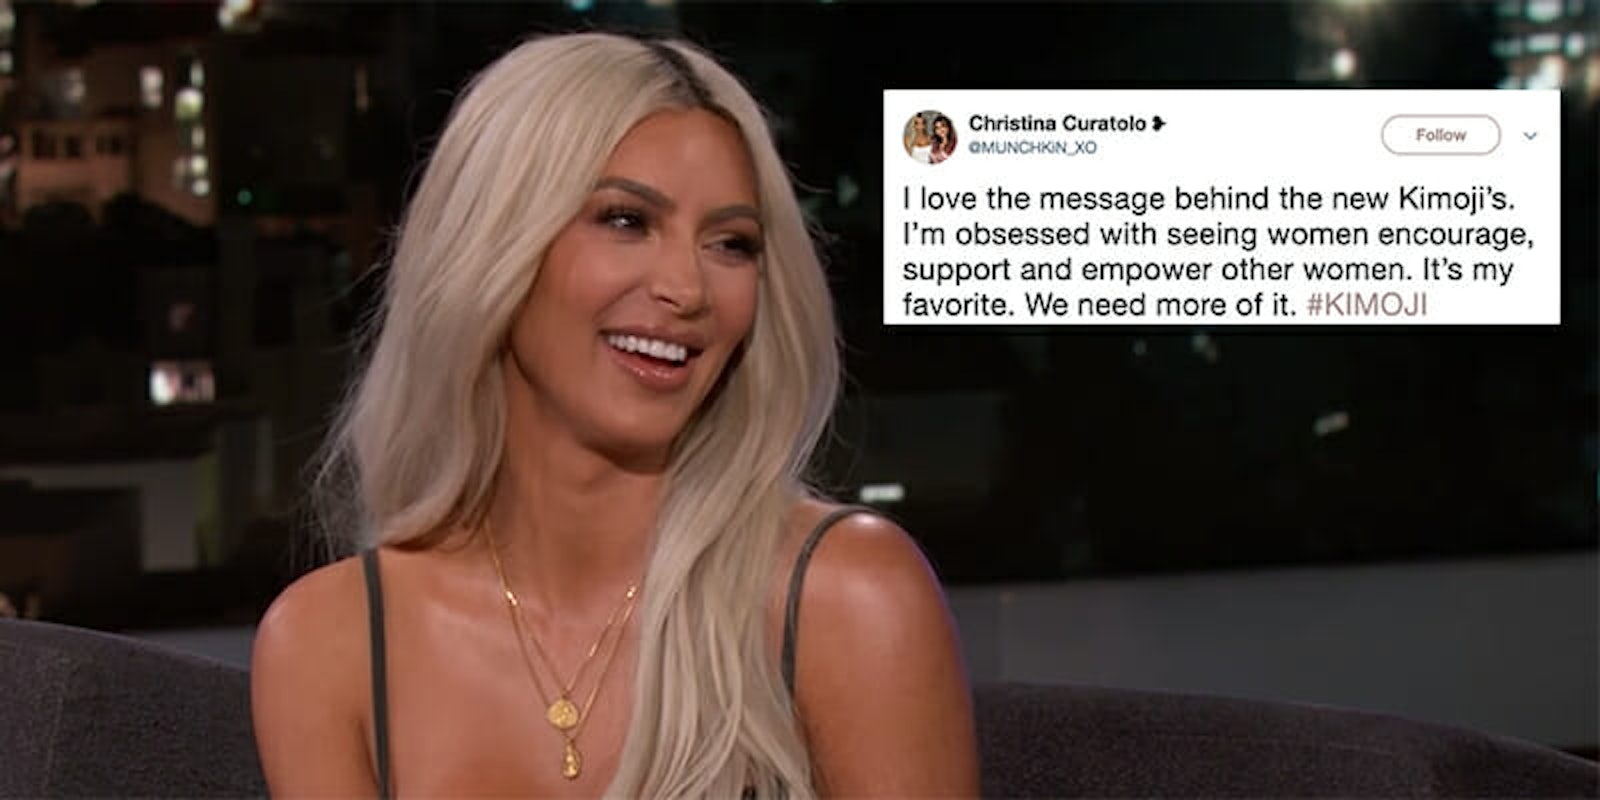 Kim Kardashian West rolled out a 'feminist' expansion for her Kimoji app.